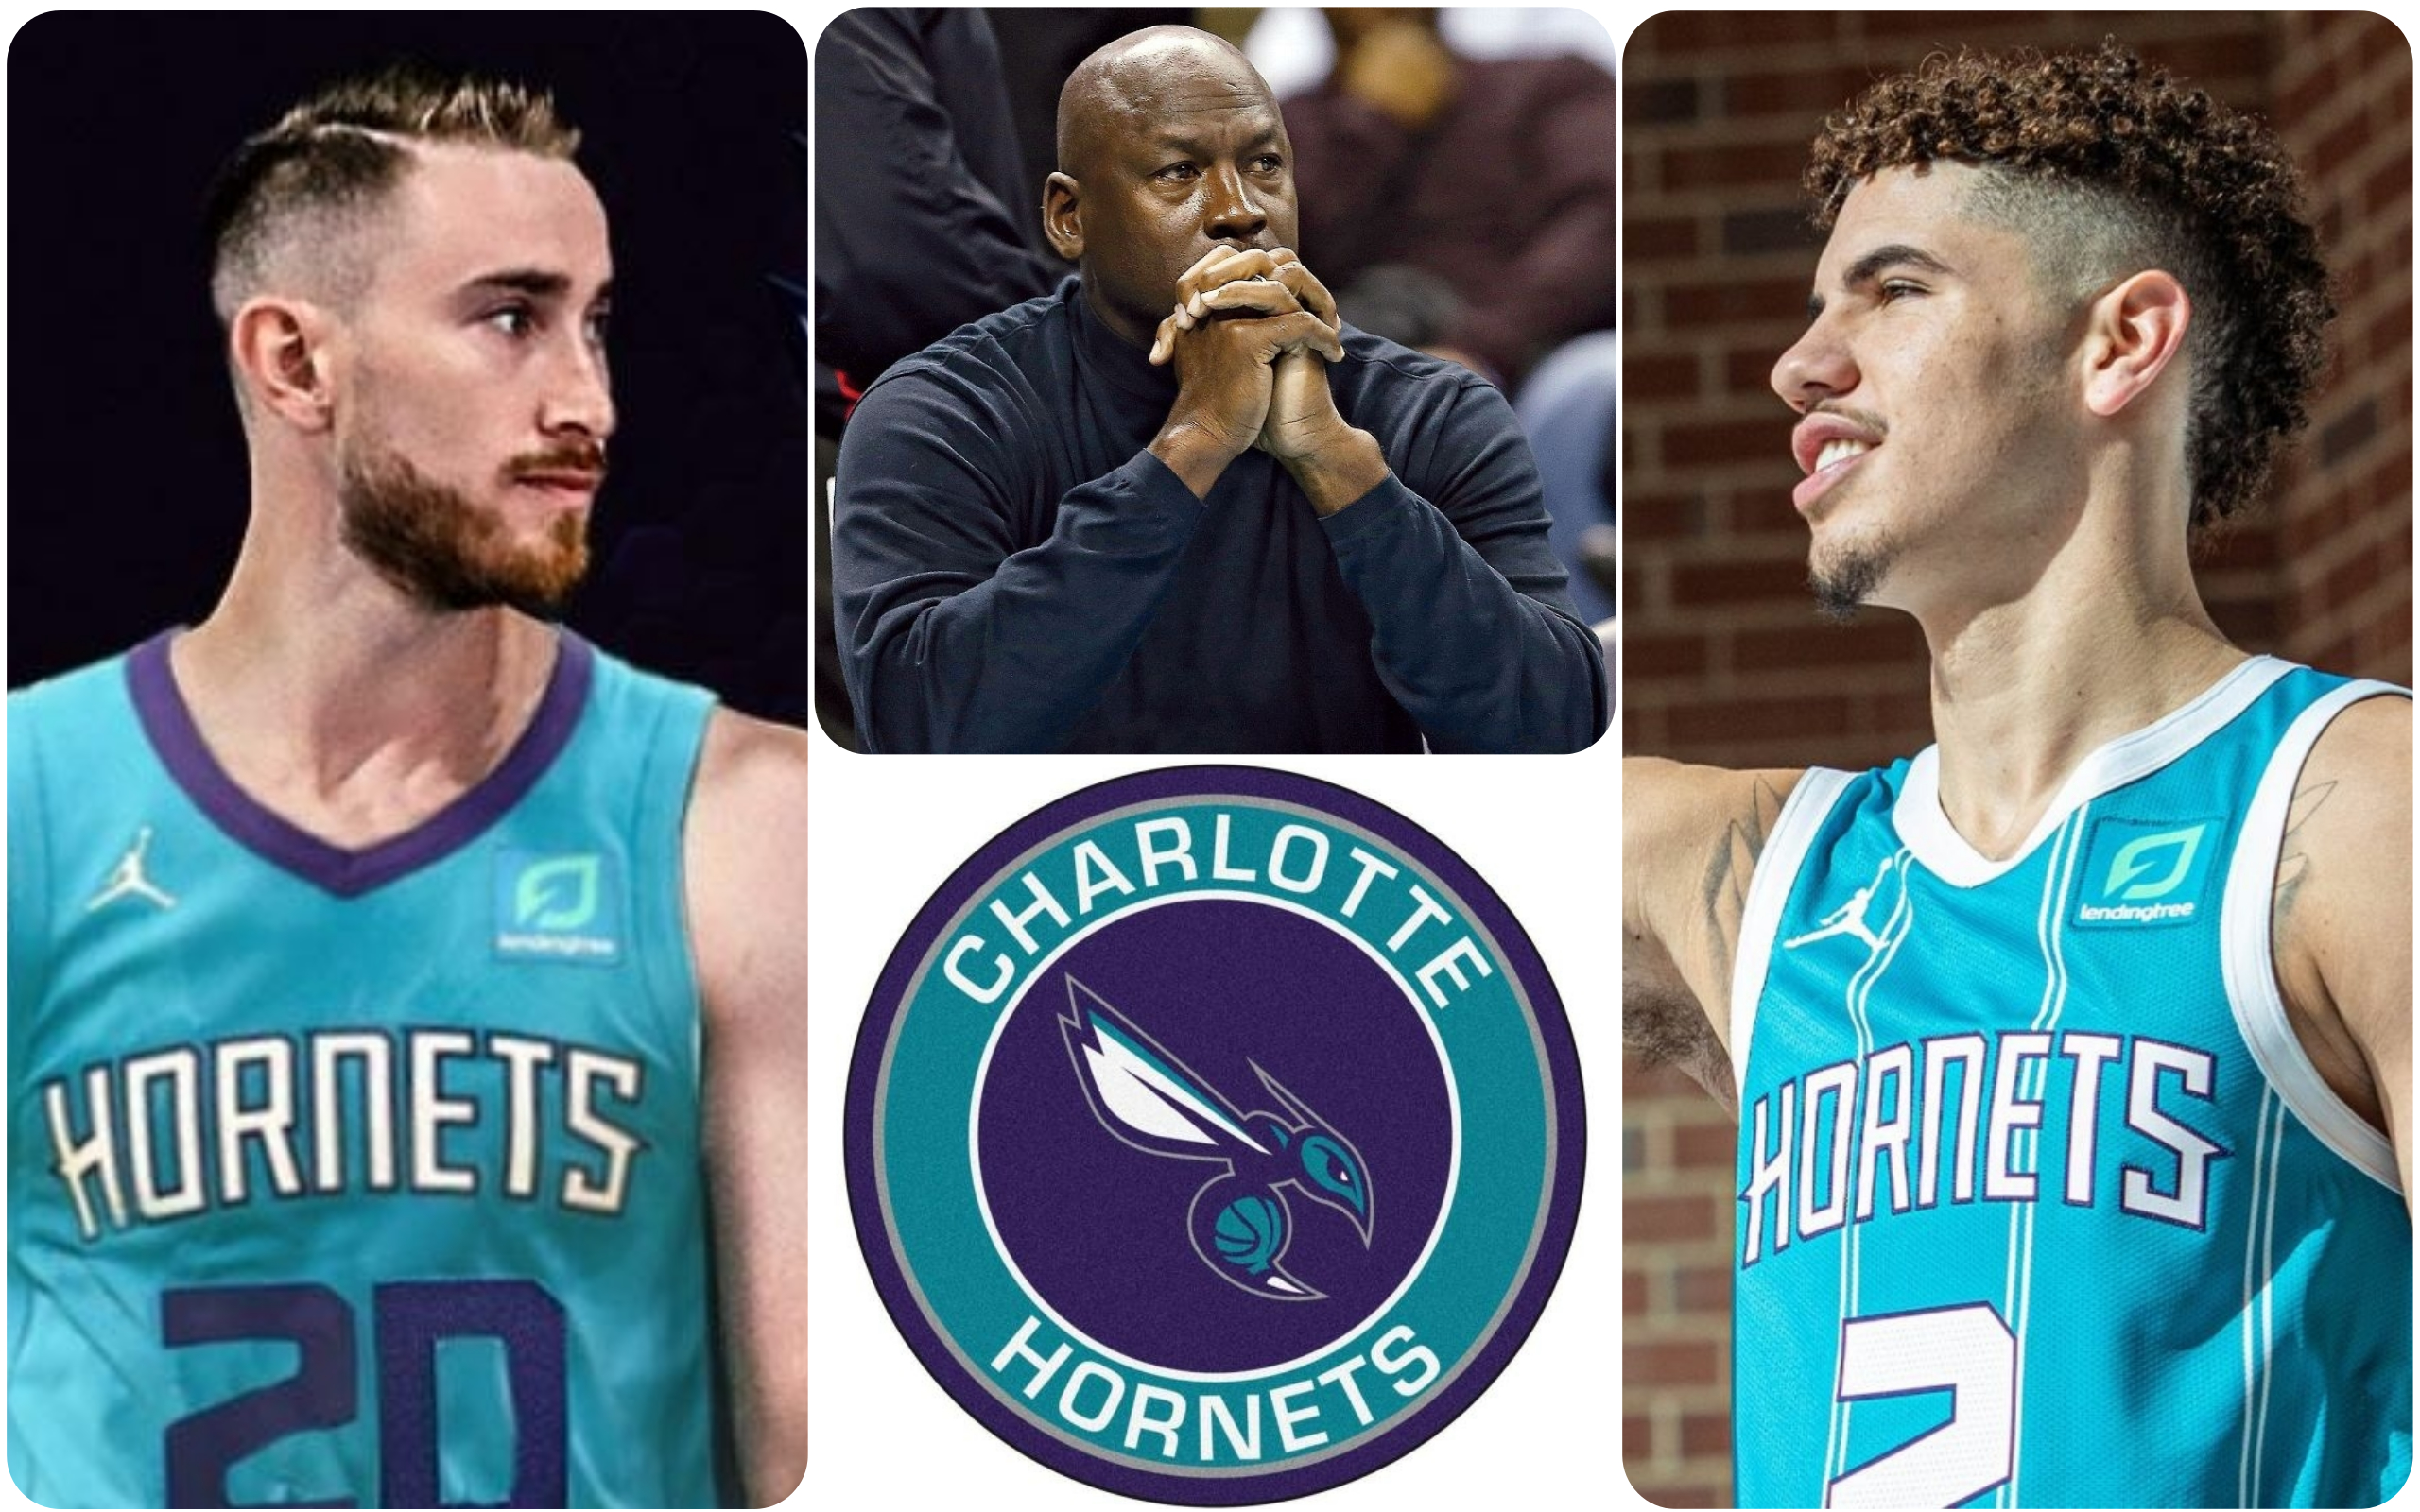 Throwback: Charlotte Hornets brand returns to Queen City